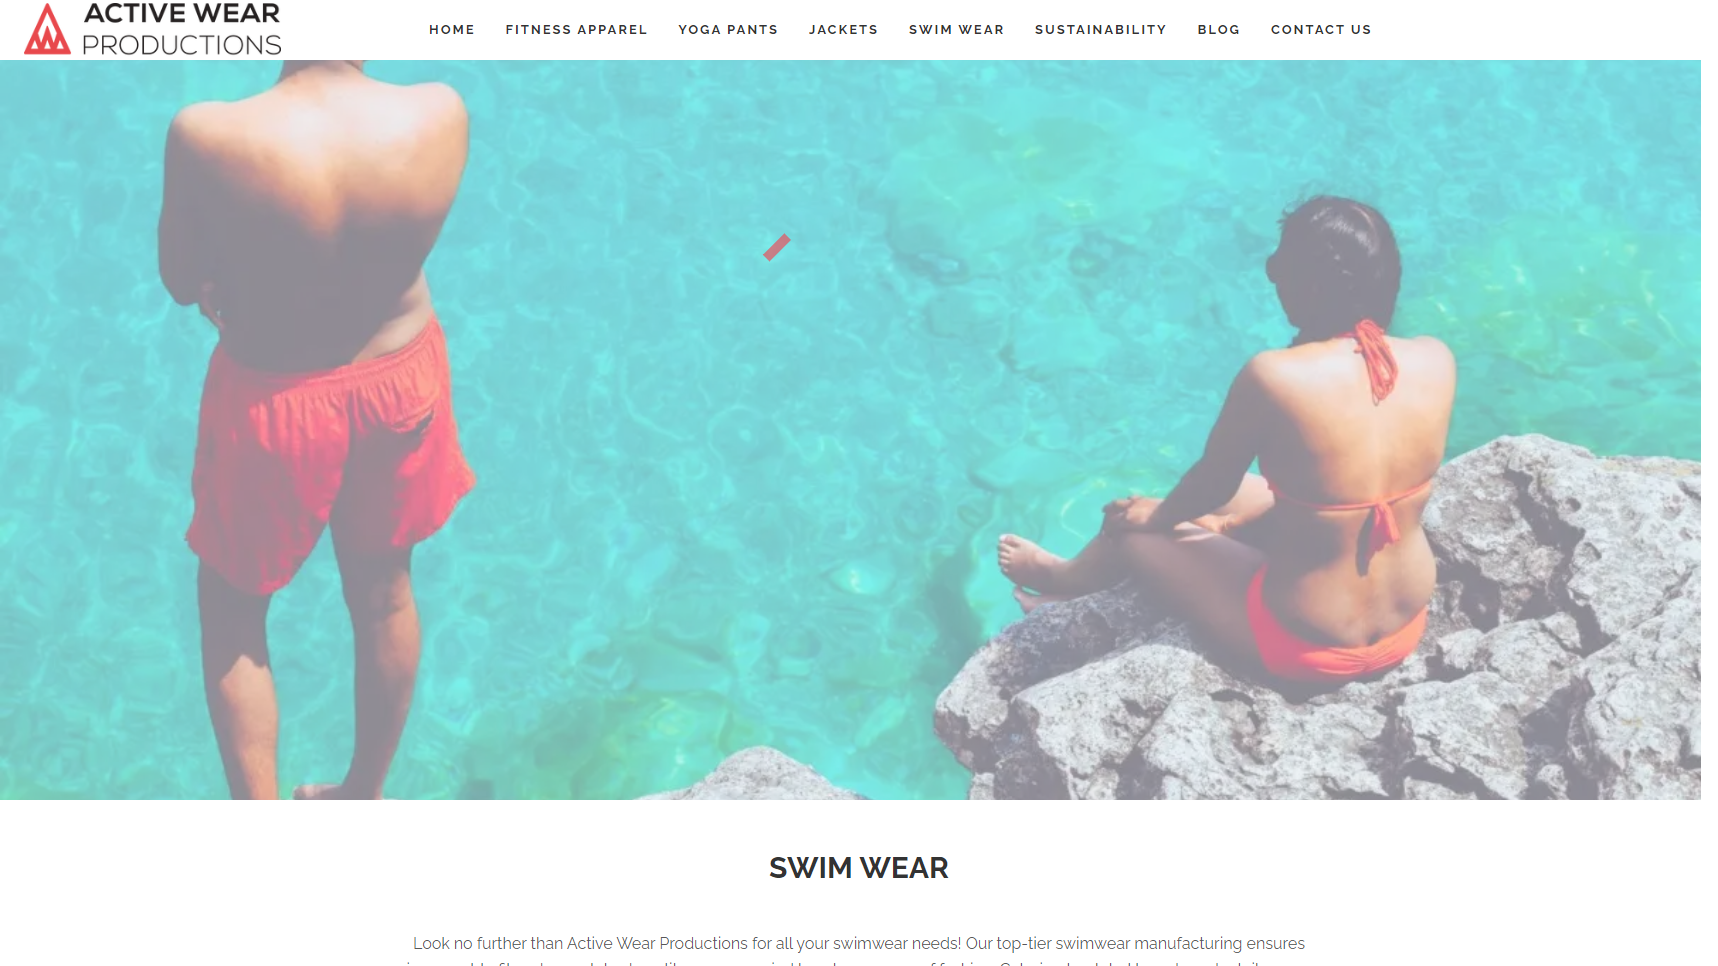 Activewear Productions - Swimwear Manufacturer